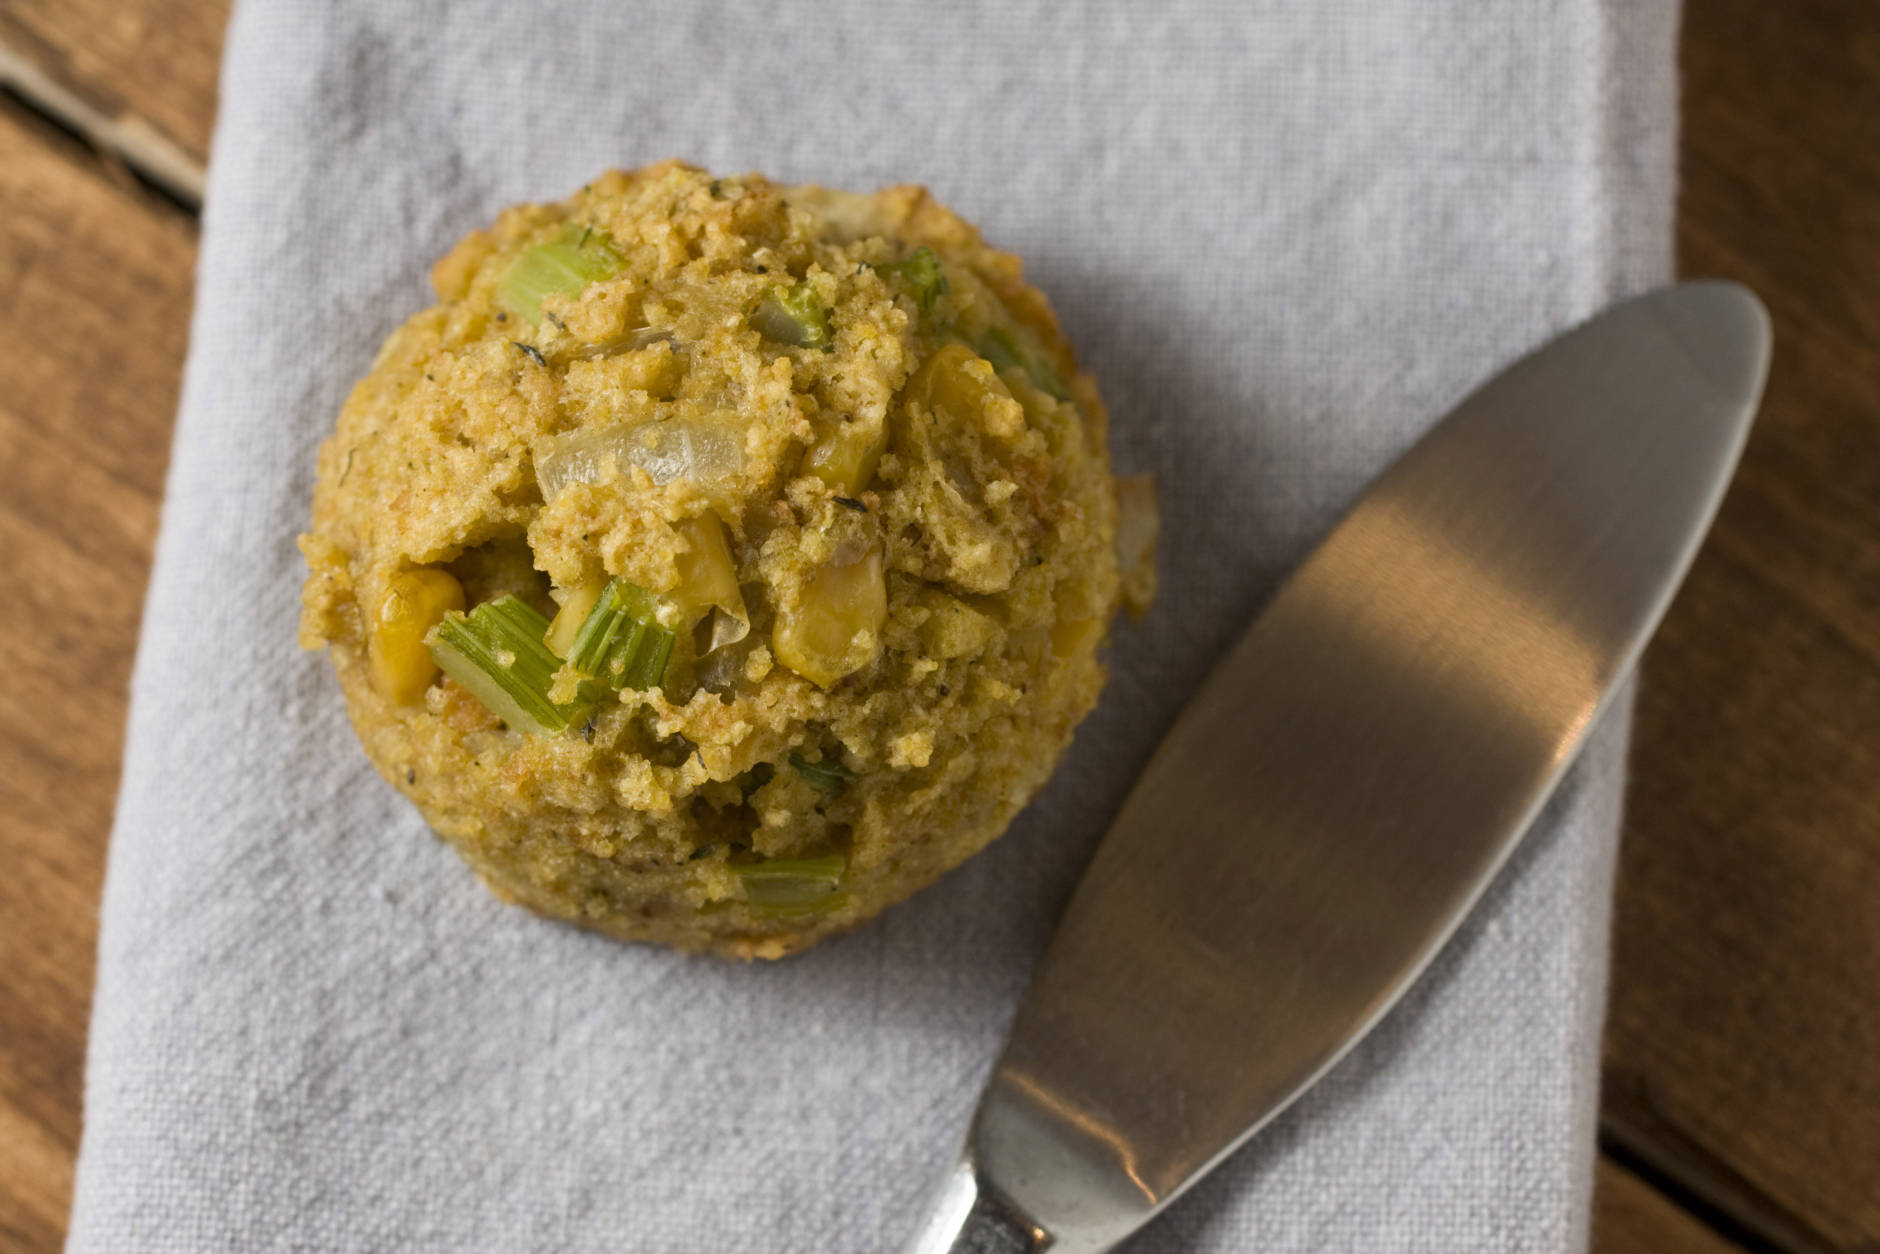 <h2>Stuffing muffin</h2>
<p>This recipe is perfect for the a few day after Thanksgiving when only a little stuffing, turkey, ham and spinach are left.</p>
<p>Throw it all into <a href="https://www.budgetbytes.com/leftover-stuffin-muffins/" target="_blank" rel="noopener">this stuffing muffin recipe</a>.</p>
